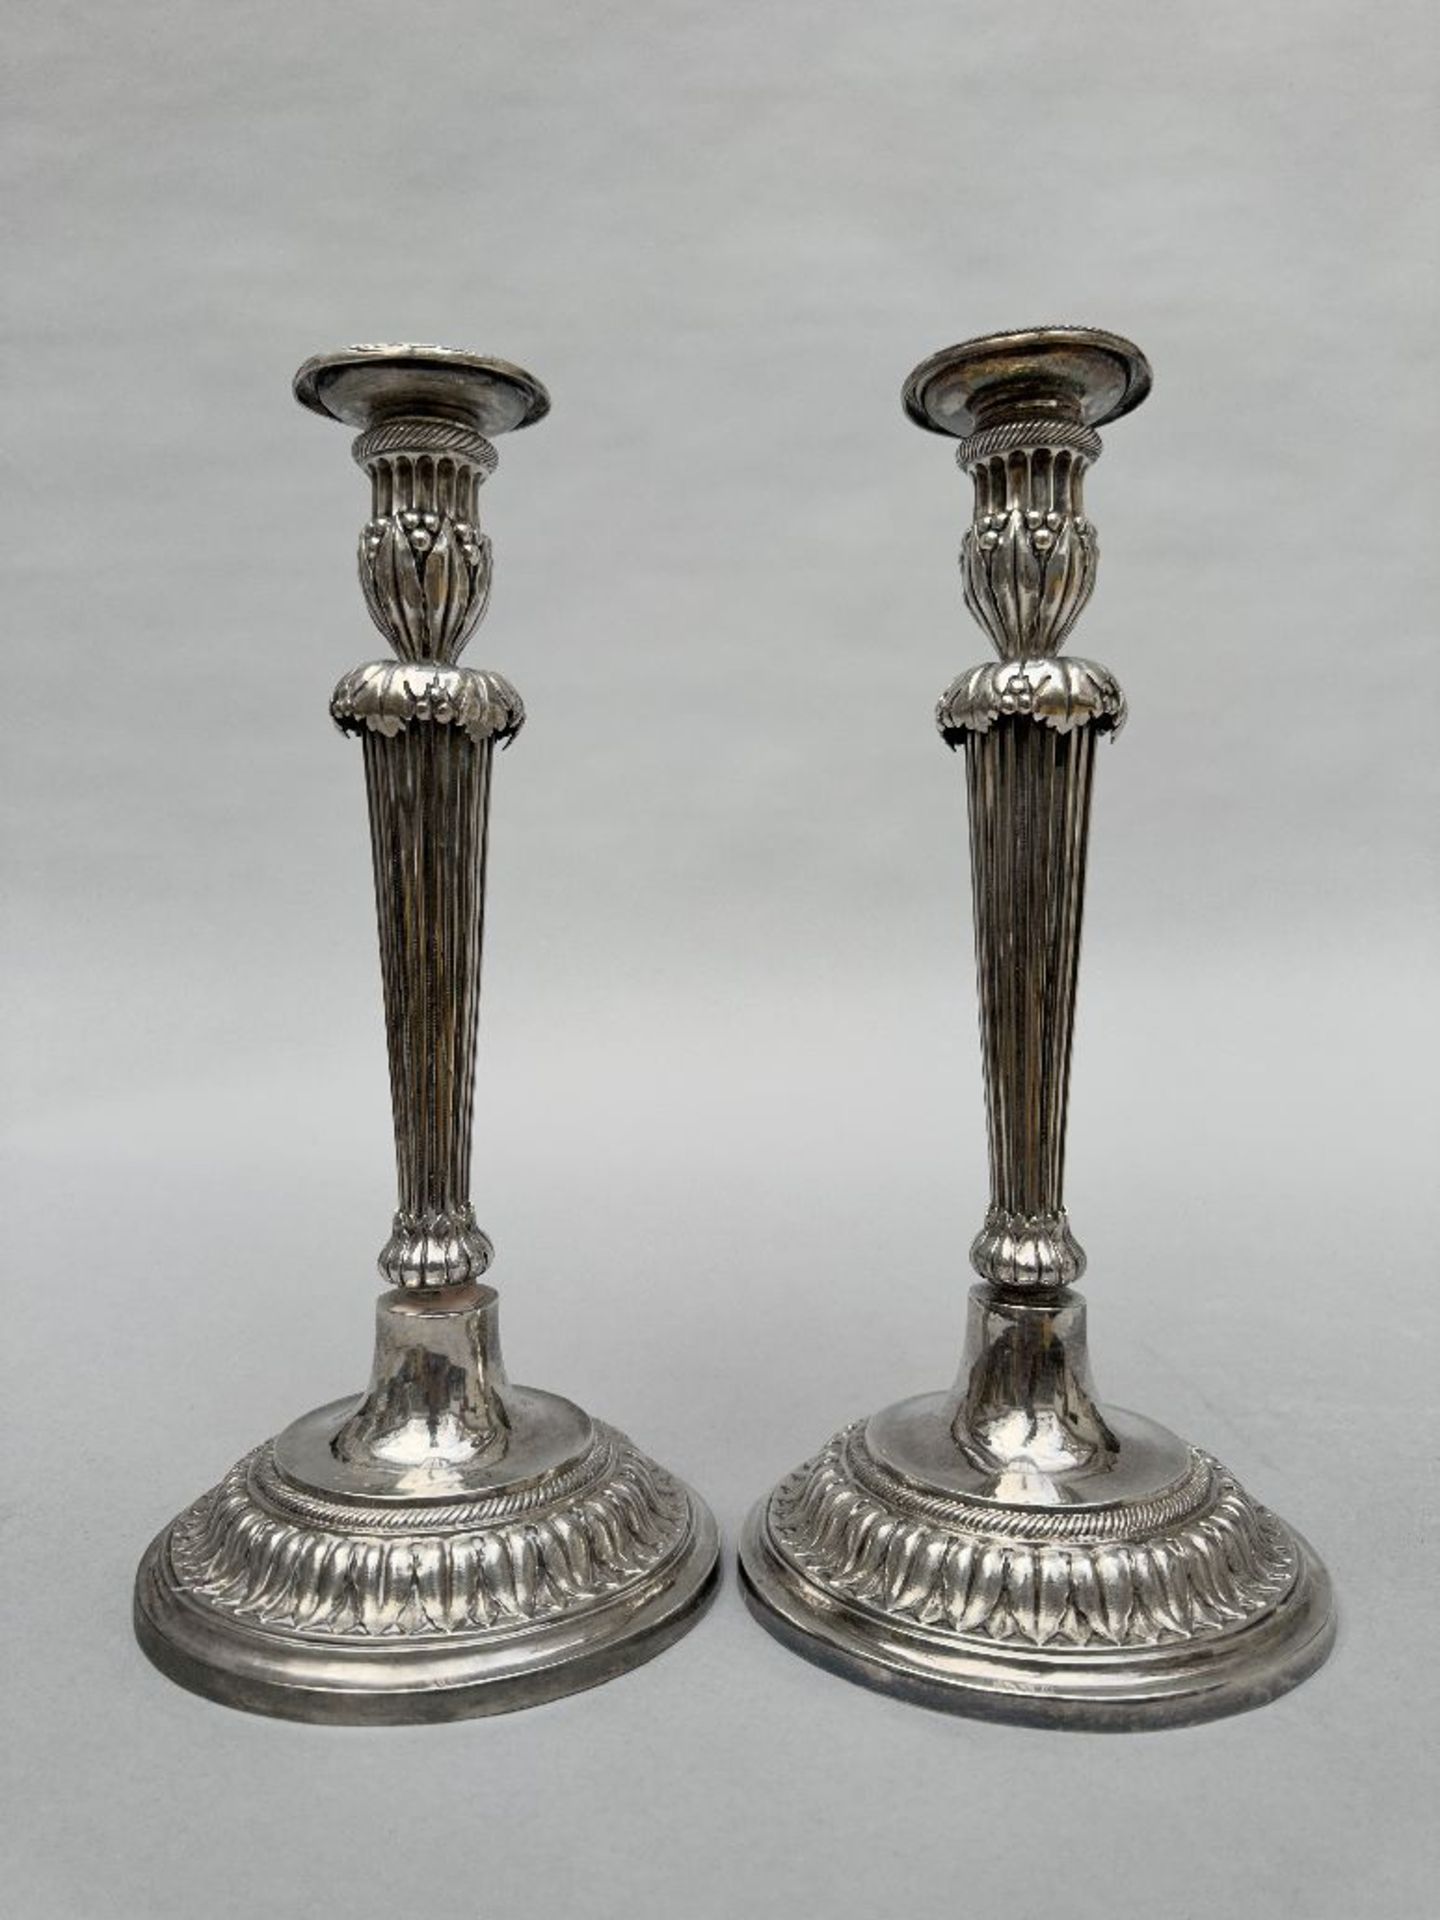 A pair of silver Louis XVI candlesticks by Joannes Baptiste, Ghent 1781 - Image 2 of 8